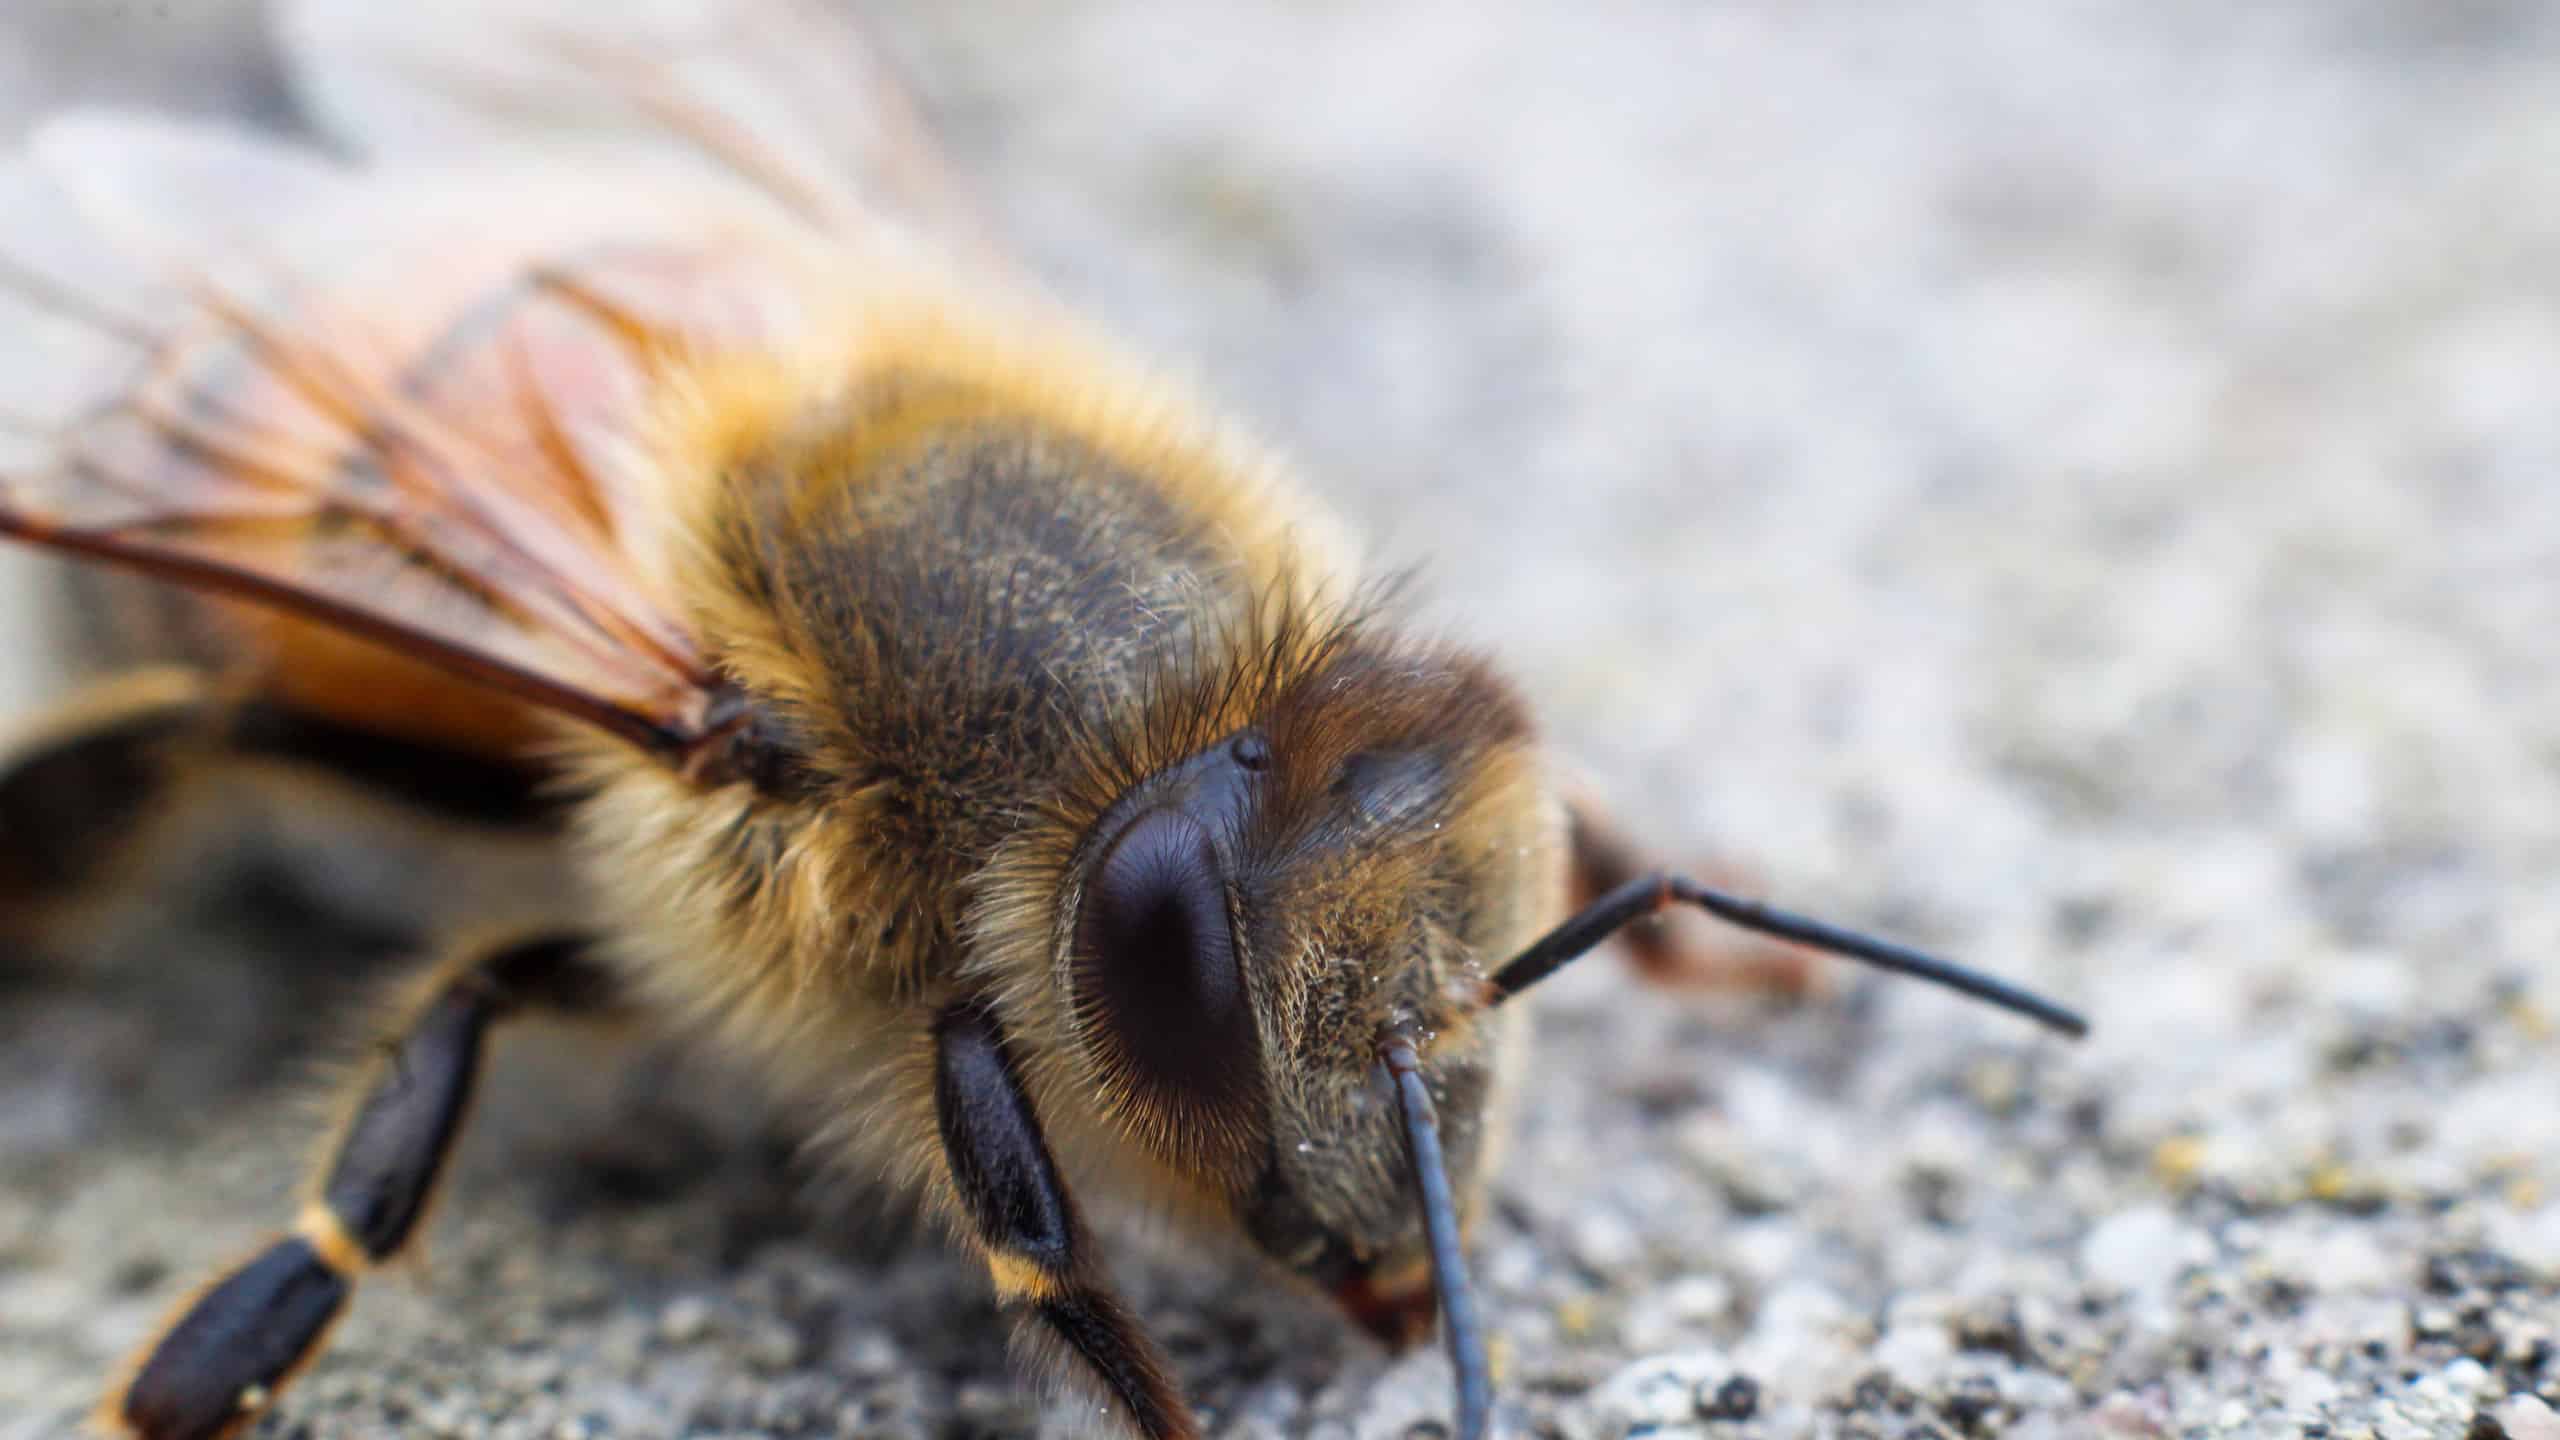 A bee resting on the ground with its wings spread.